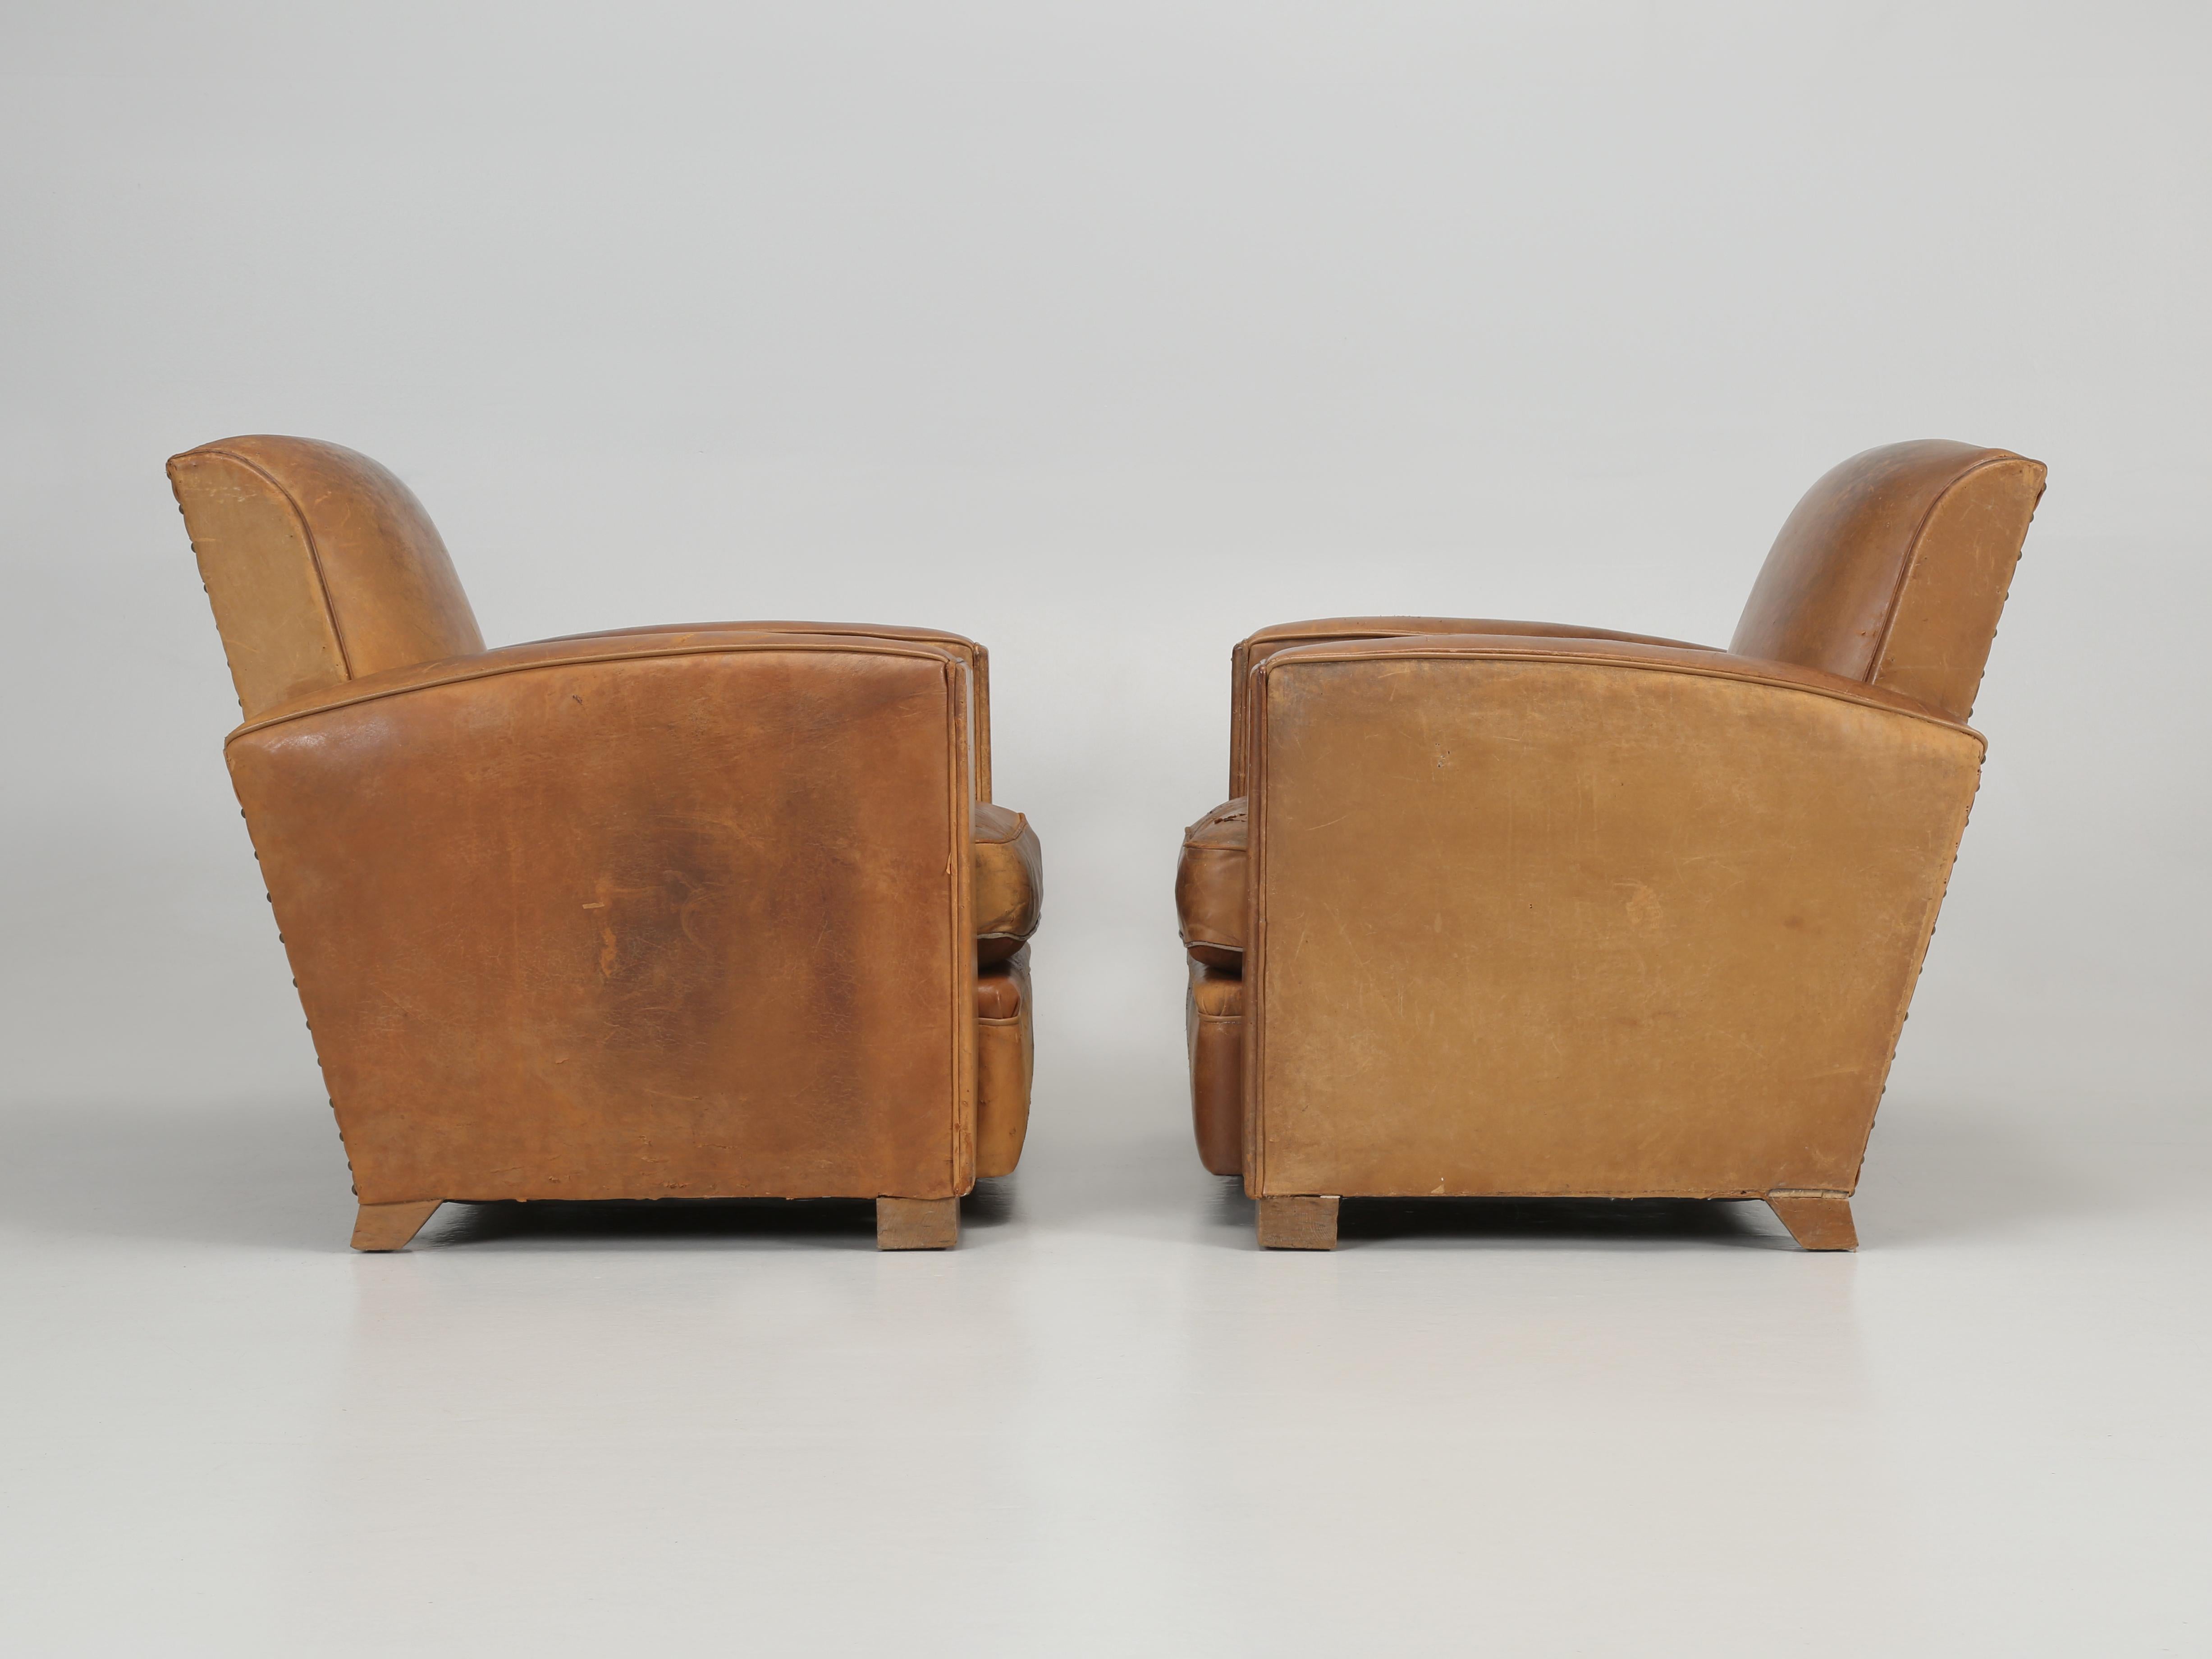 French Leather Club Chairs Restored Internally and Cosmetically Still Original For Sale 9